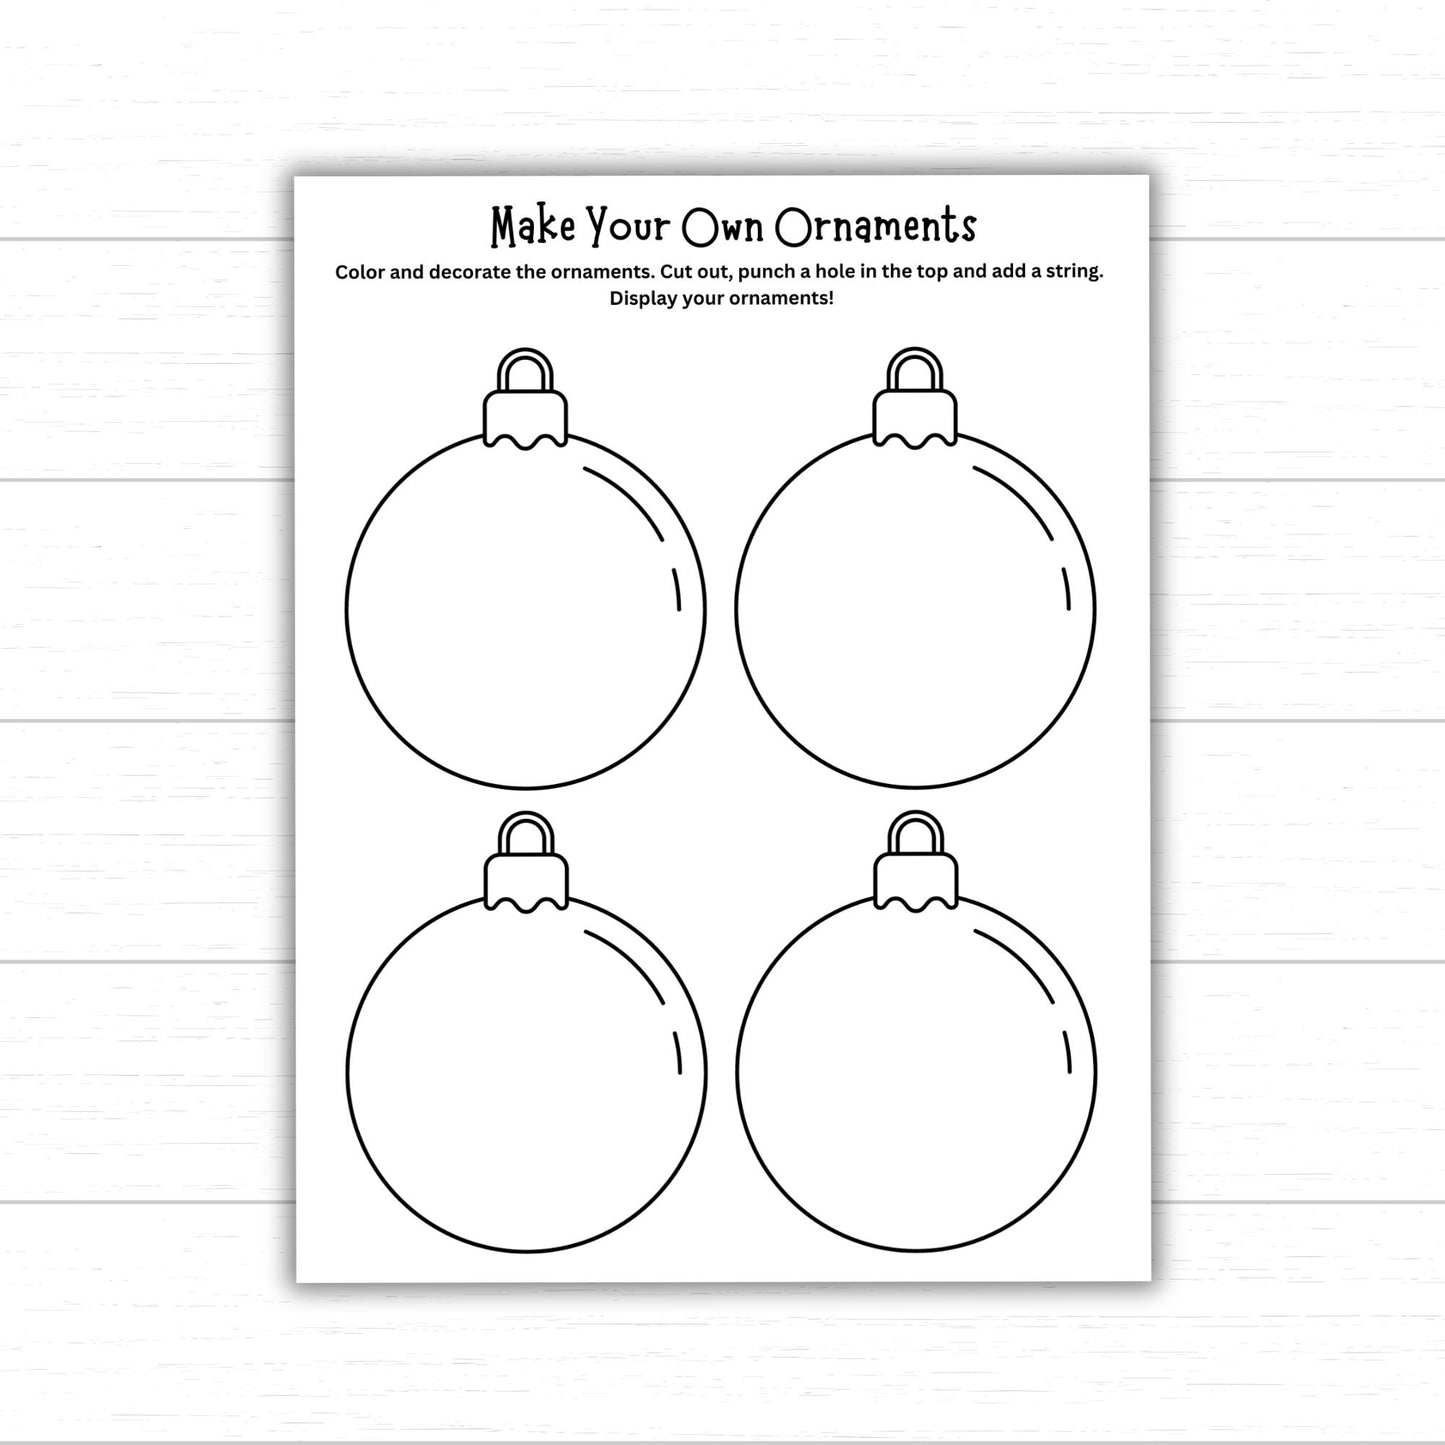 Make Your Own Ornaments, Decorate an Ornament, Design an Ornament, Printable Ornaments for Kids, Blank Ornaments to Print and Color